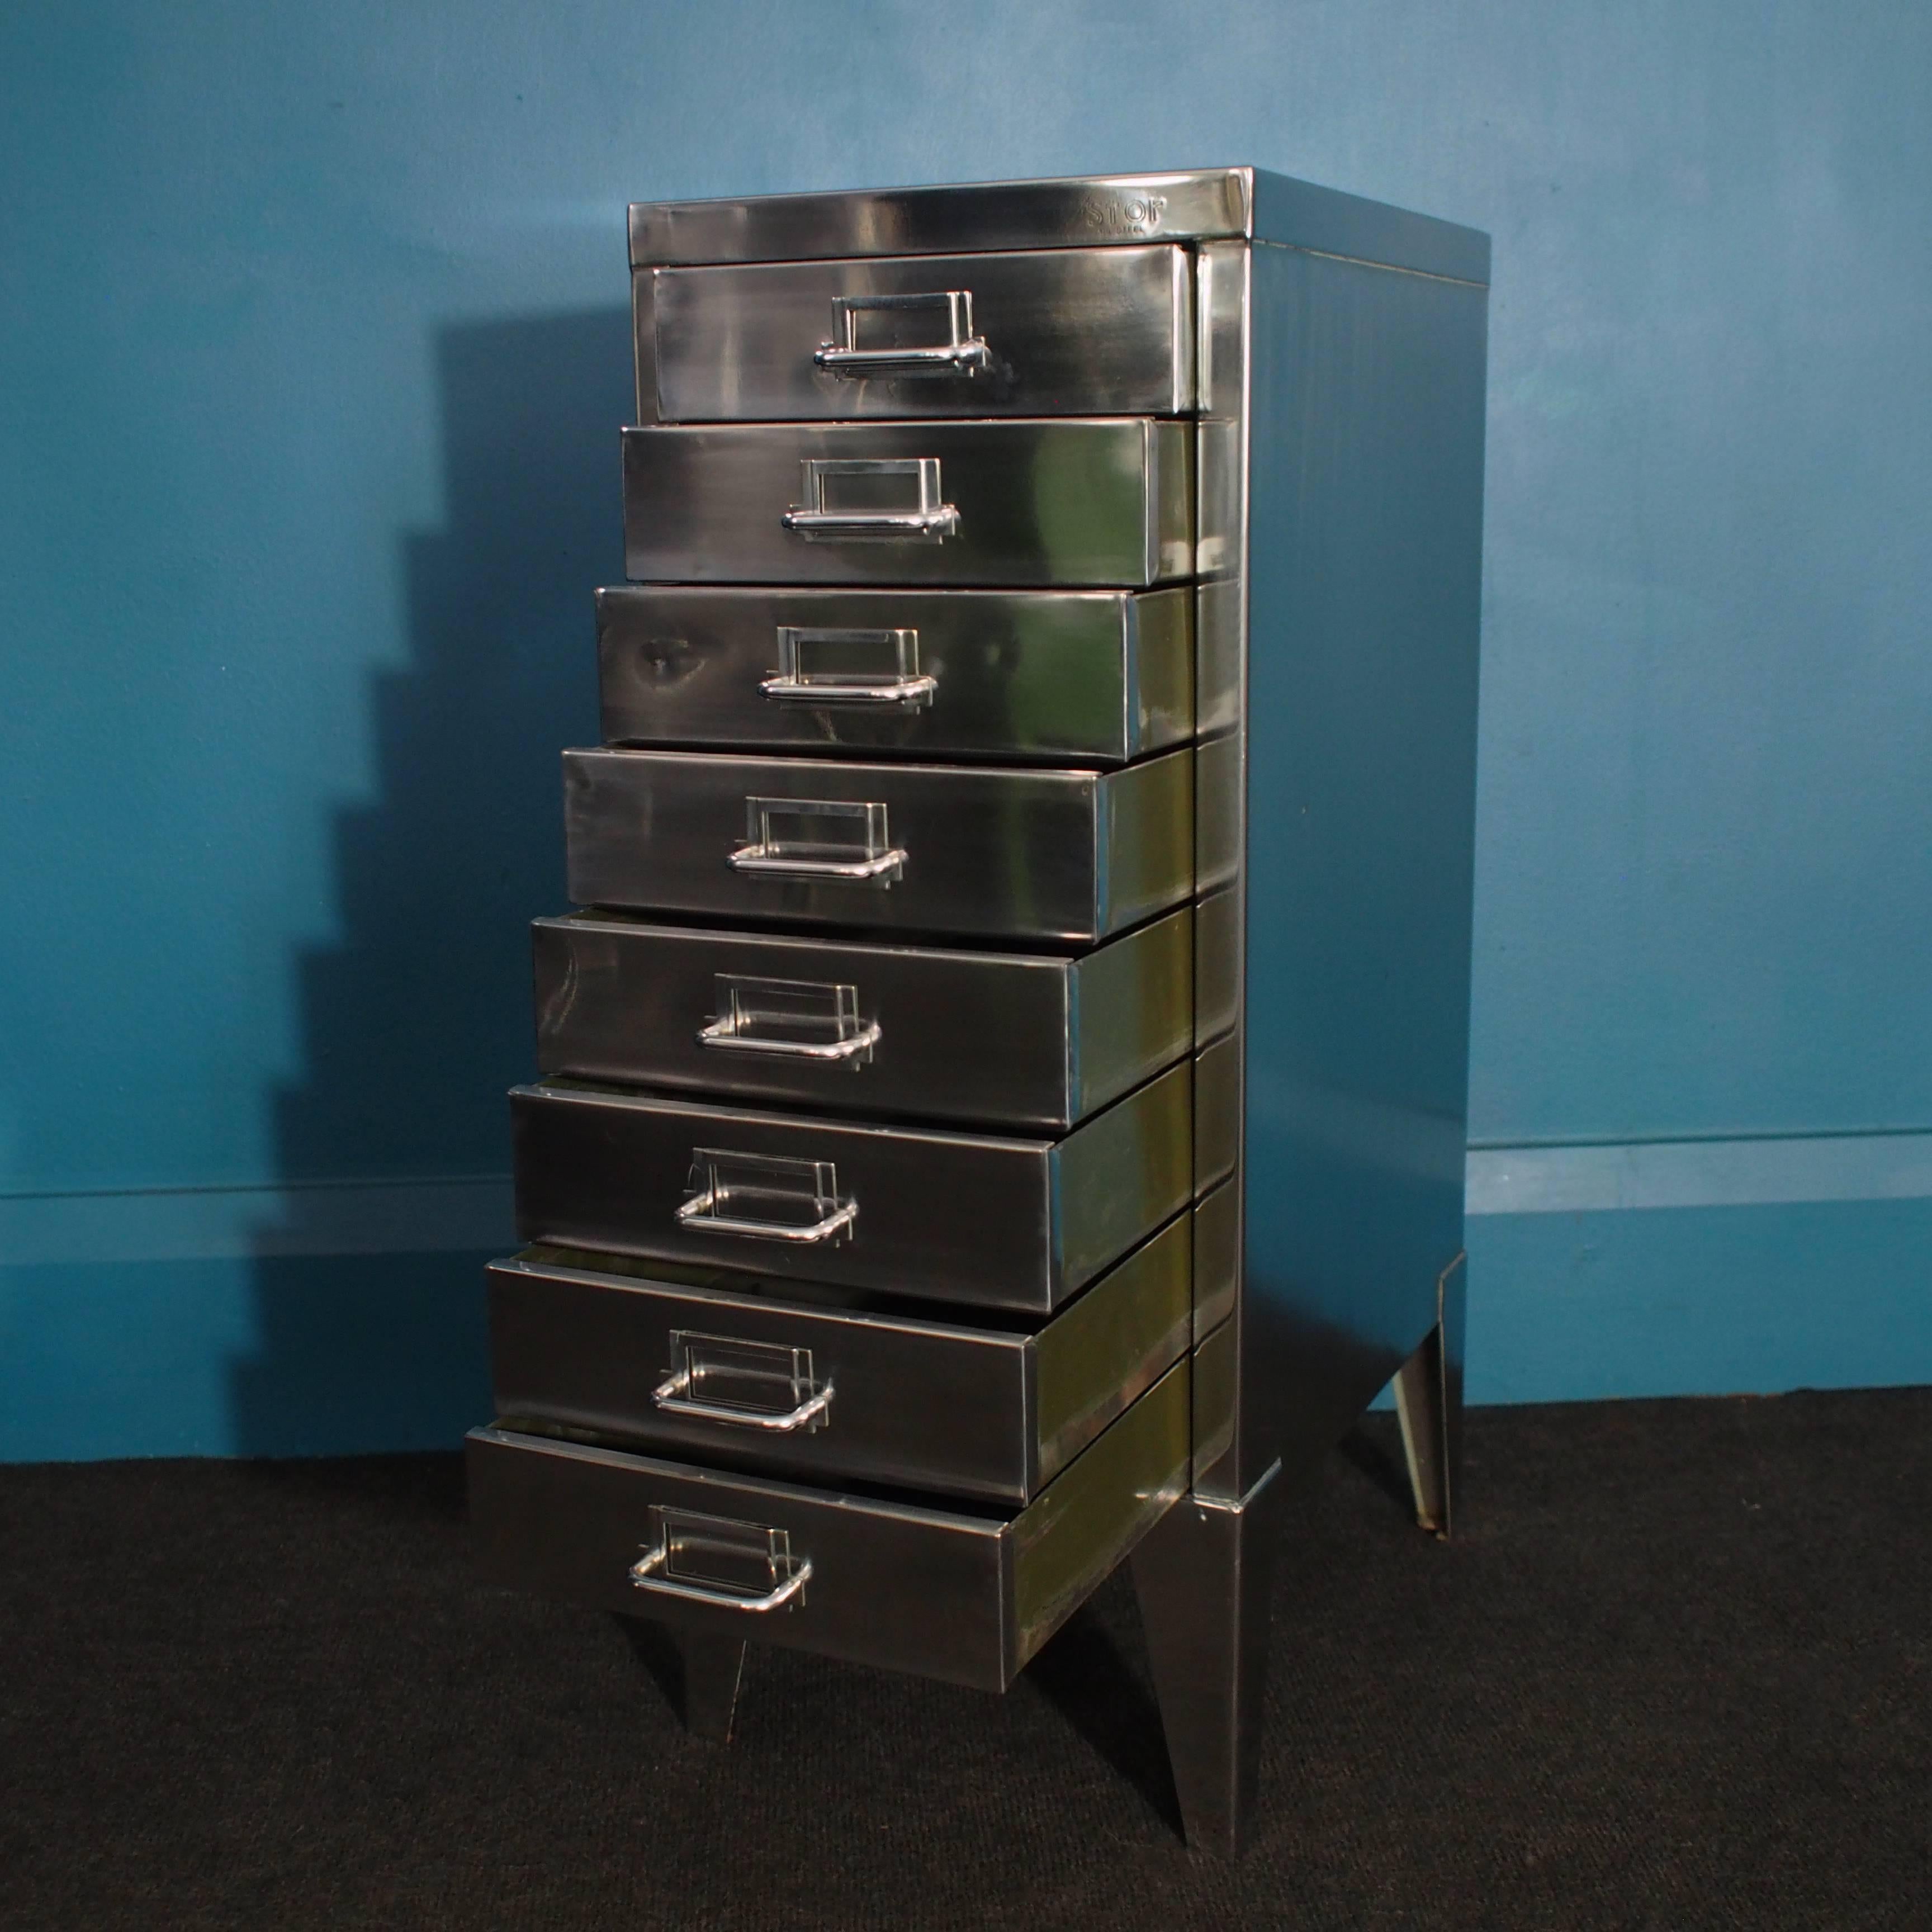 20th Century Industrial Polished Steel Filing Cabinet with Tapered Legs by Stor, circa 1950s